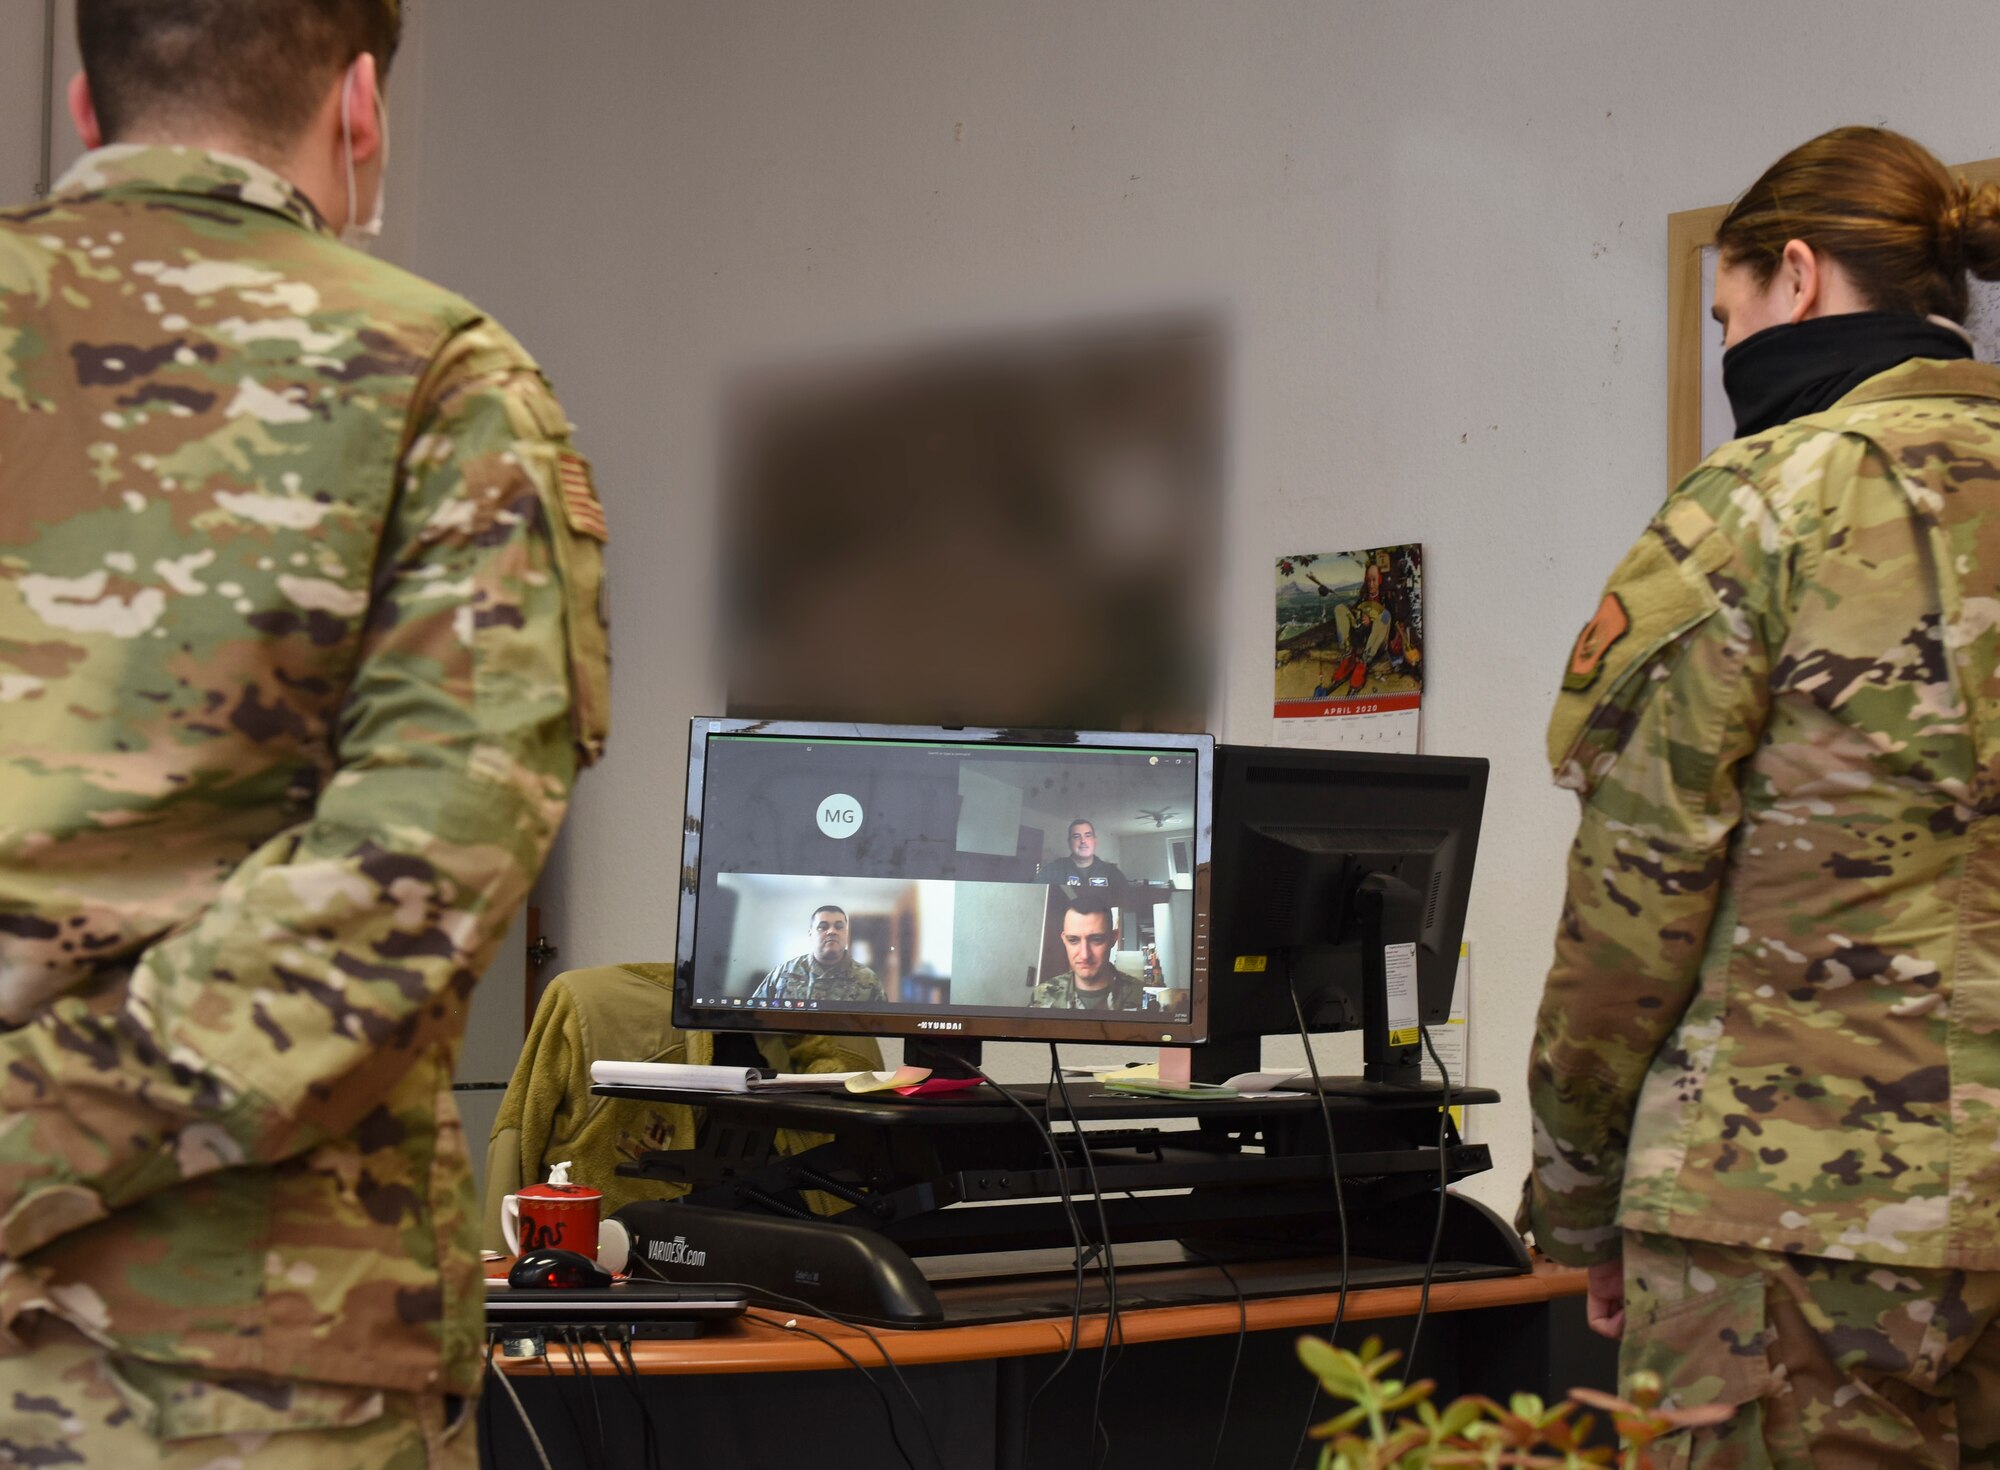 Two Airmen look at a computer monitor during a teleconference call.